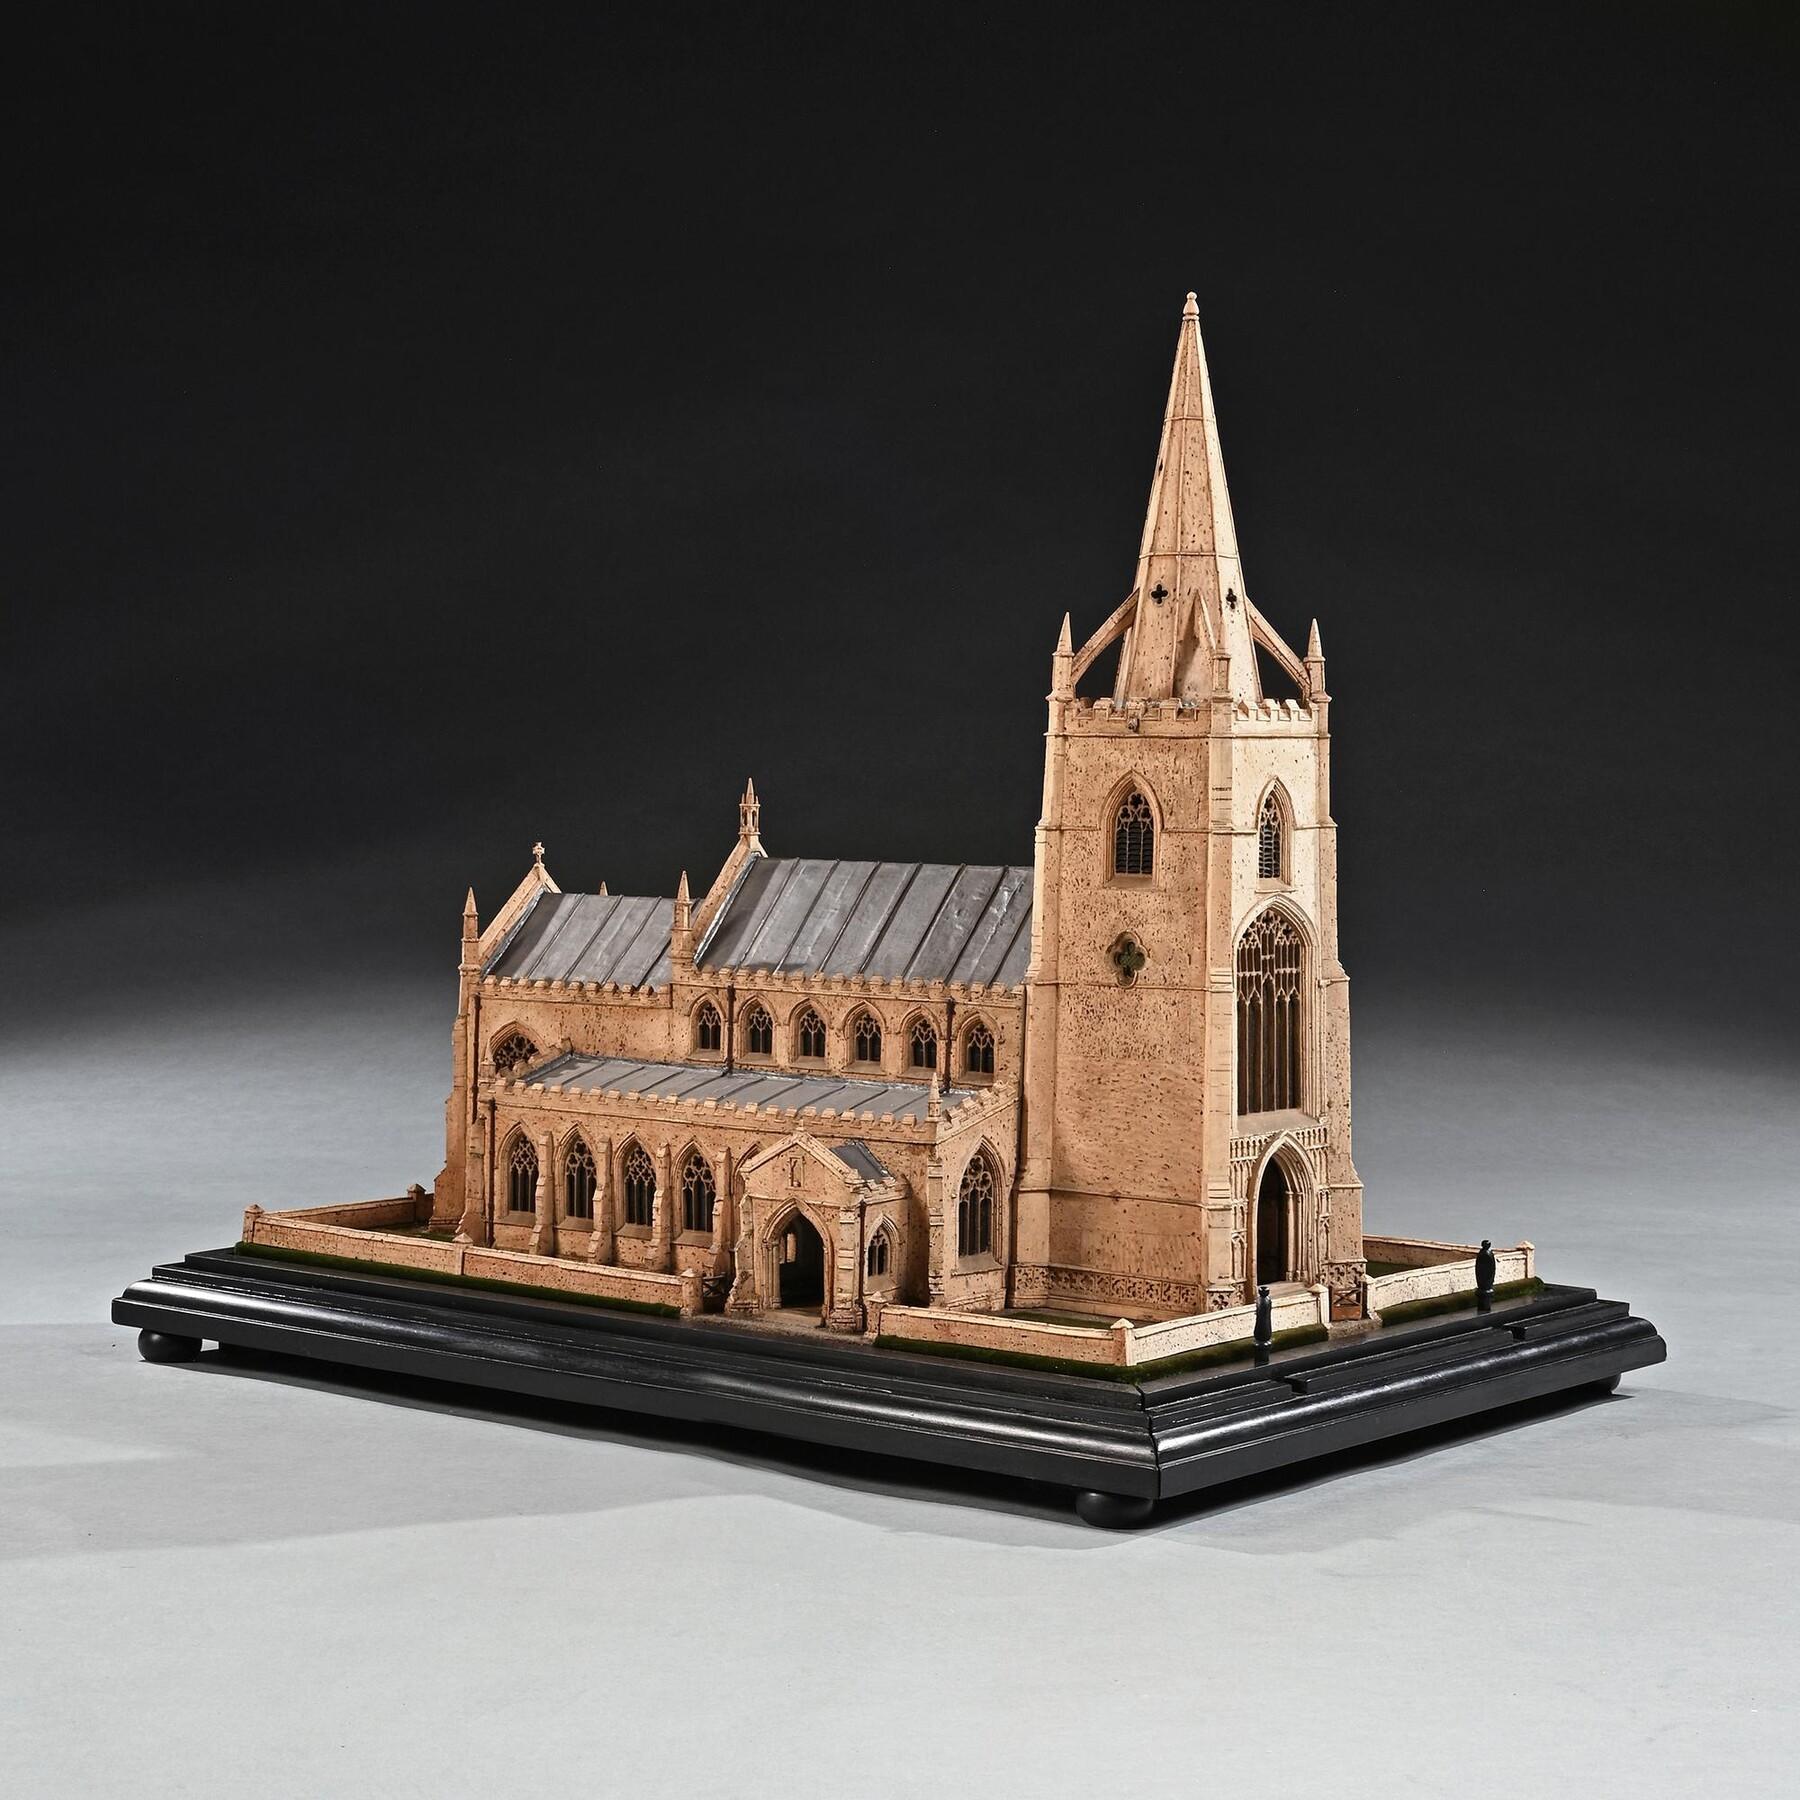 A Spectacular Masterpiece of Cork Modelling-a Scale Architectural Model of an English Church by Cornelius Daniel Ward of Norwich.

English Circa 1900-1930

Provenance
Made by Cornelius Daniel Ward (1865-c.1928) and then retained by his old firm, C.